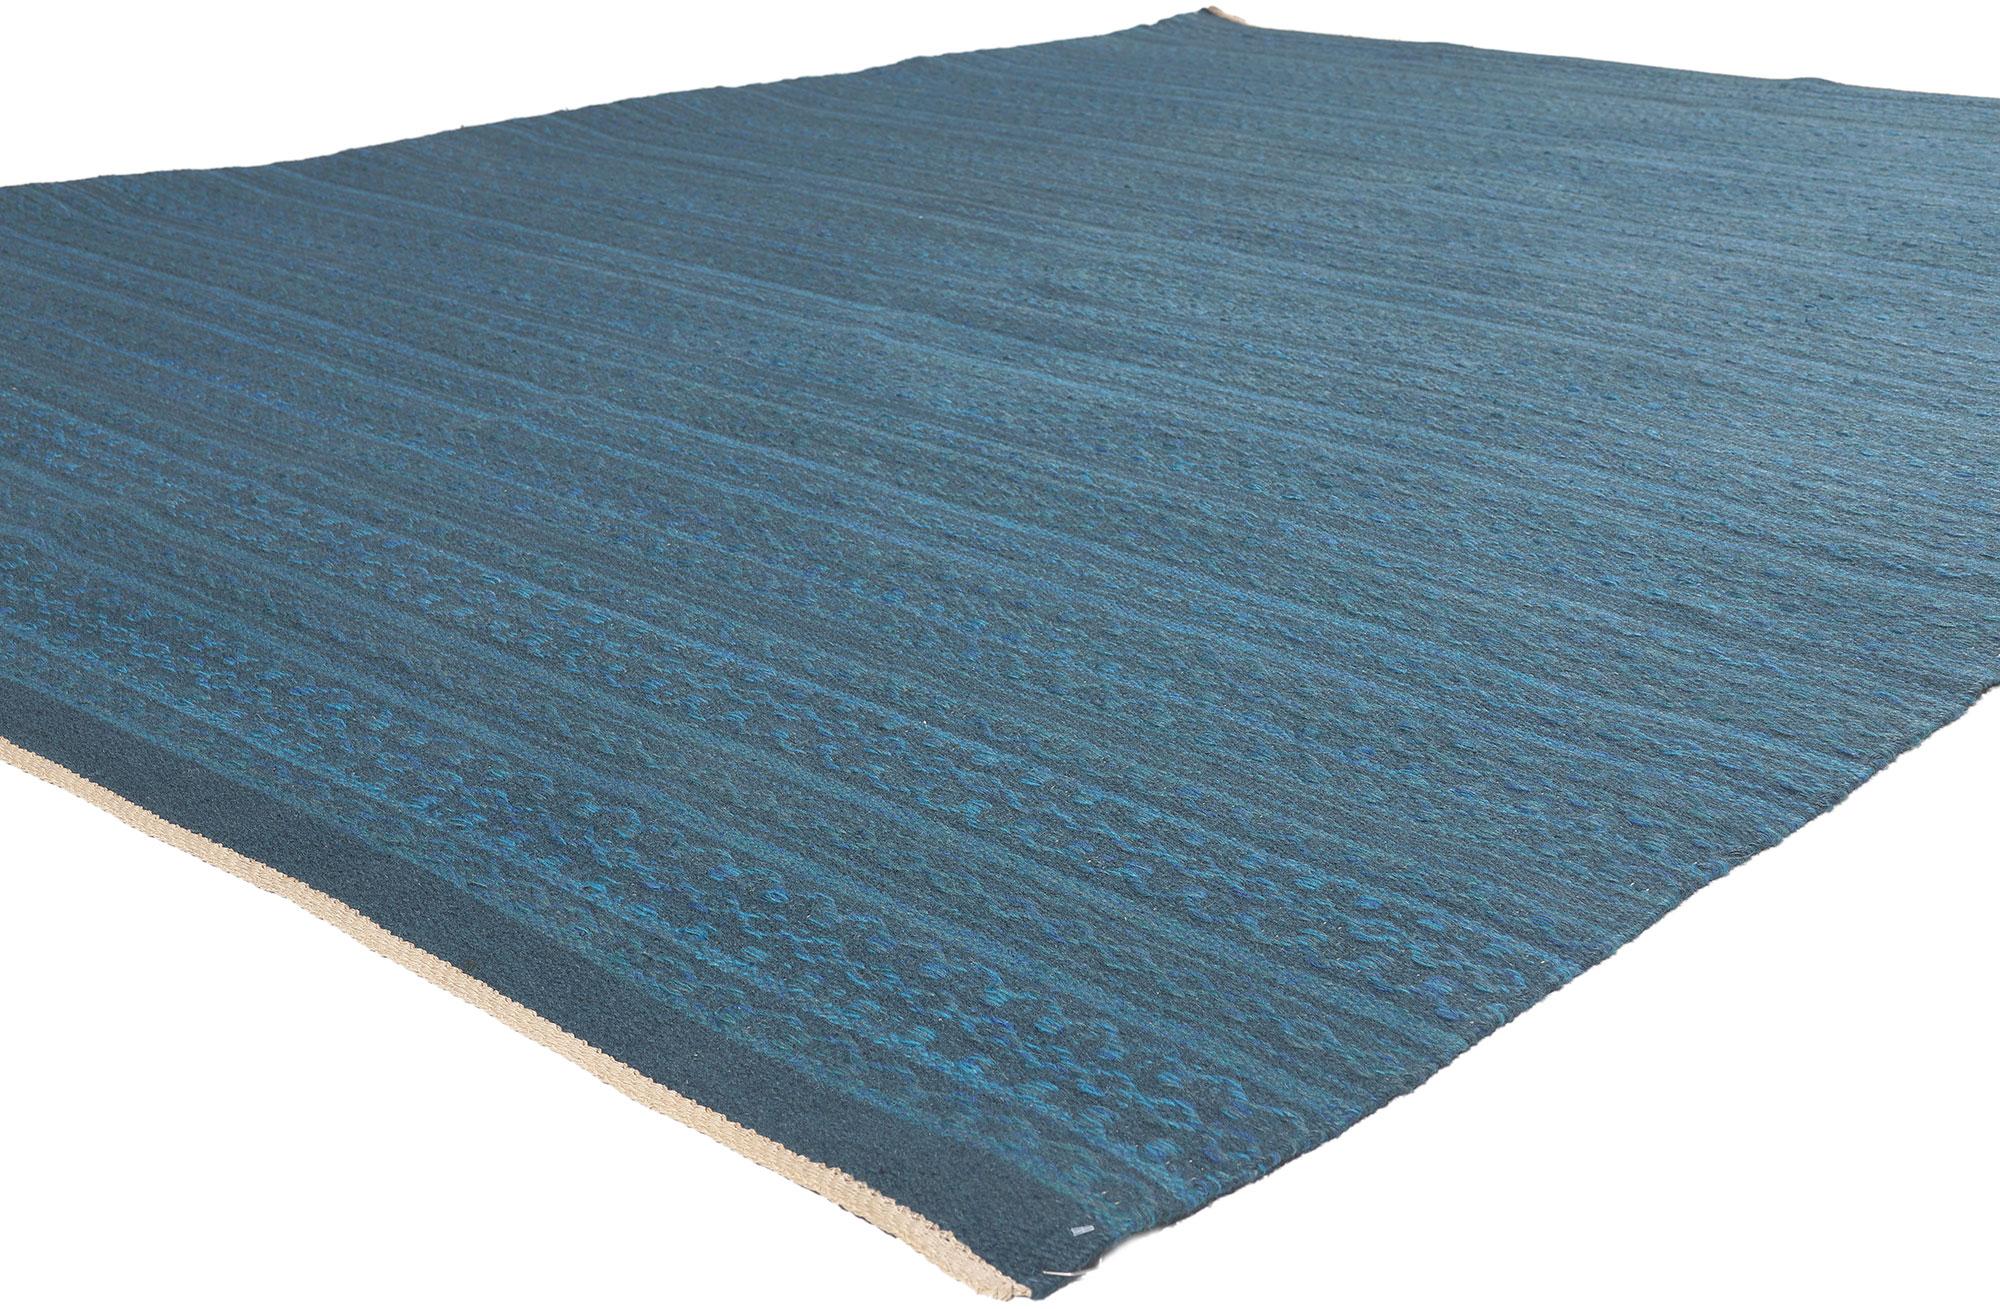 76914 Vintage Swedish Kilim Rollakan Rug, 07'08 x 10'01.
Scandinavian Modern meets Cycladic Santorini in this handwoven wool vintage Swedish rollakan rug. The striped geometric pattern and tonal blue hues woven into this piece work together